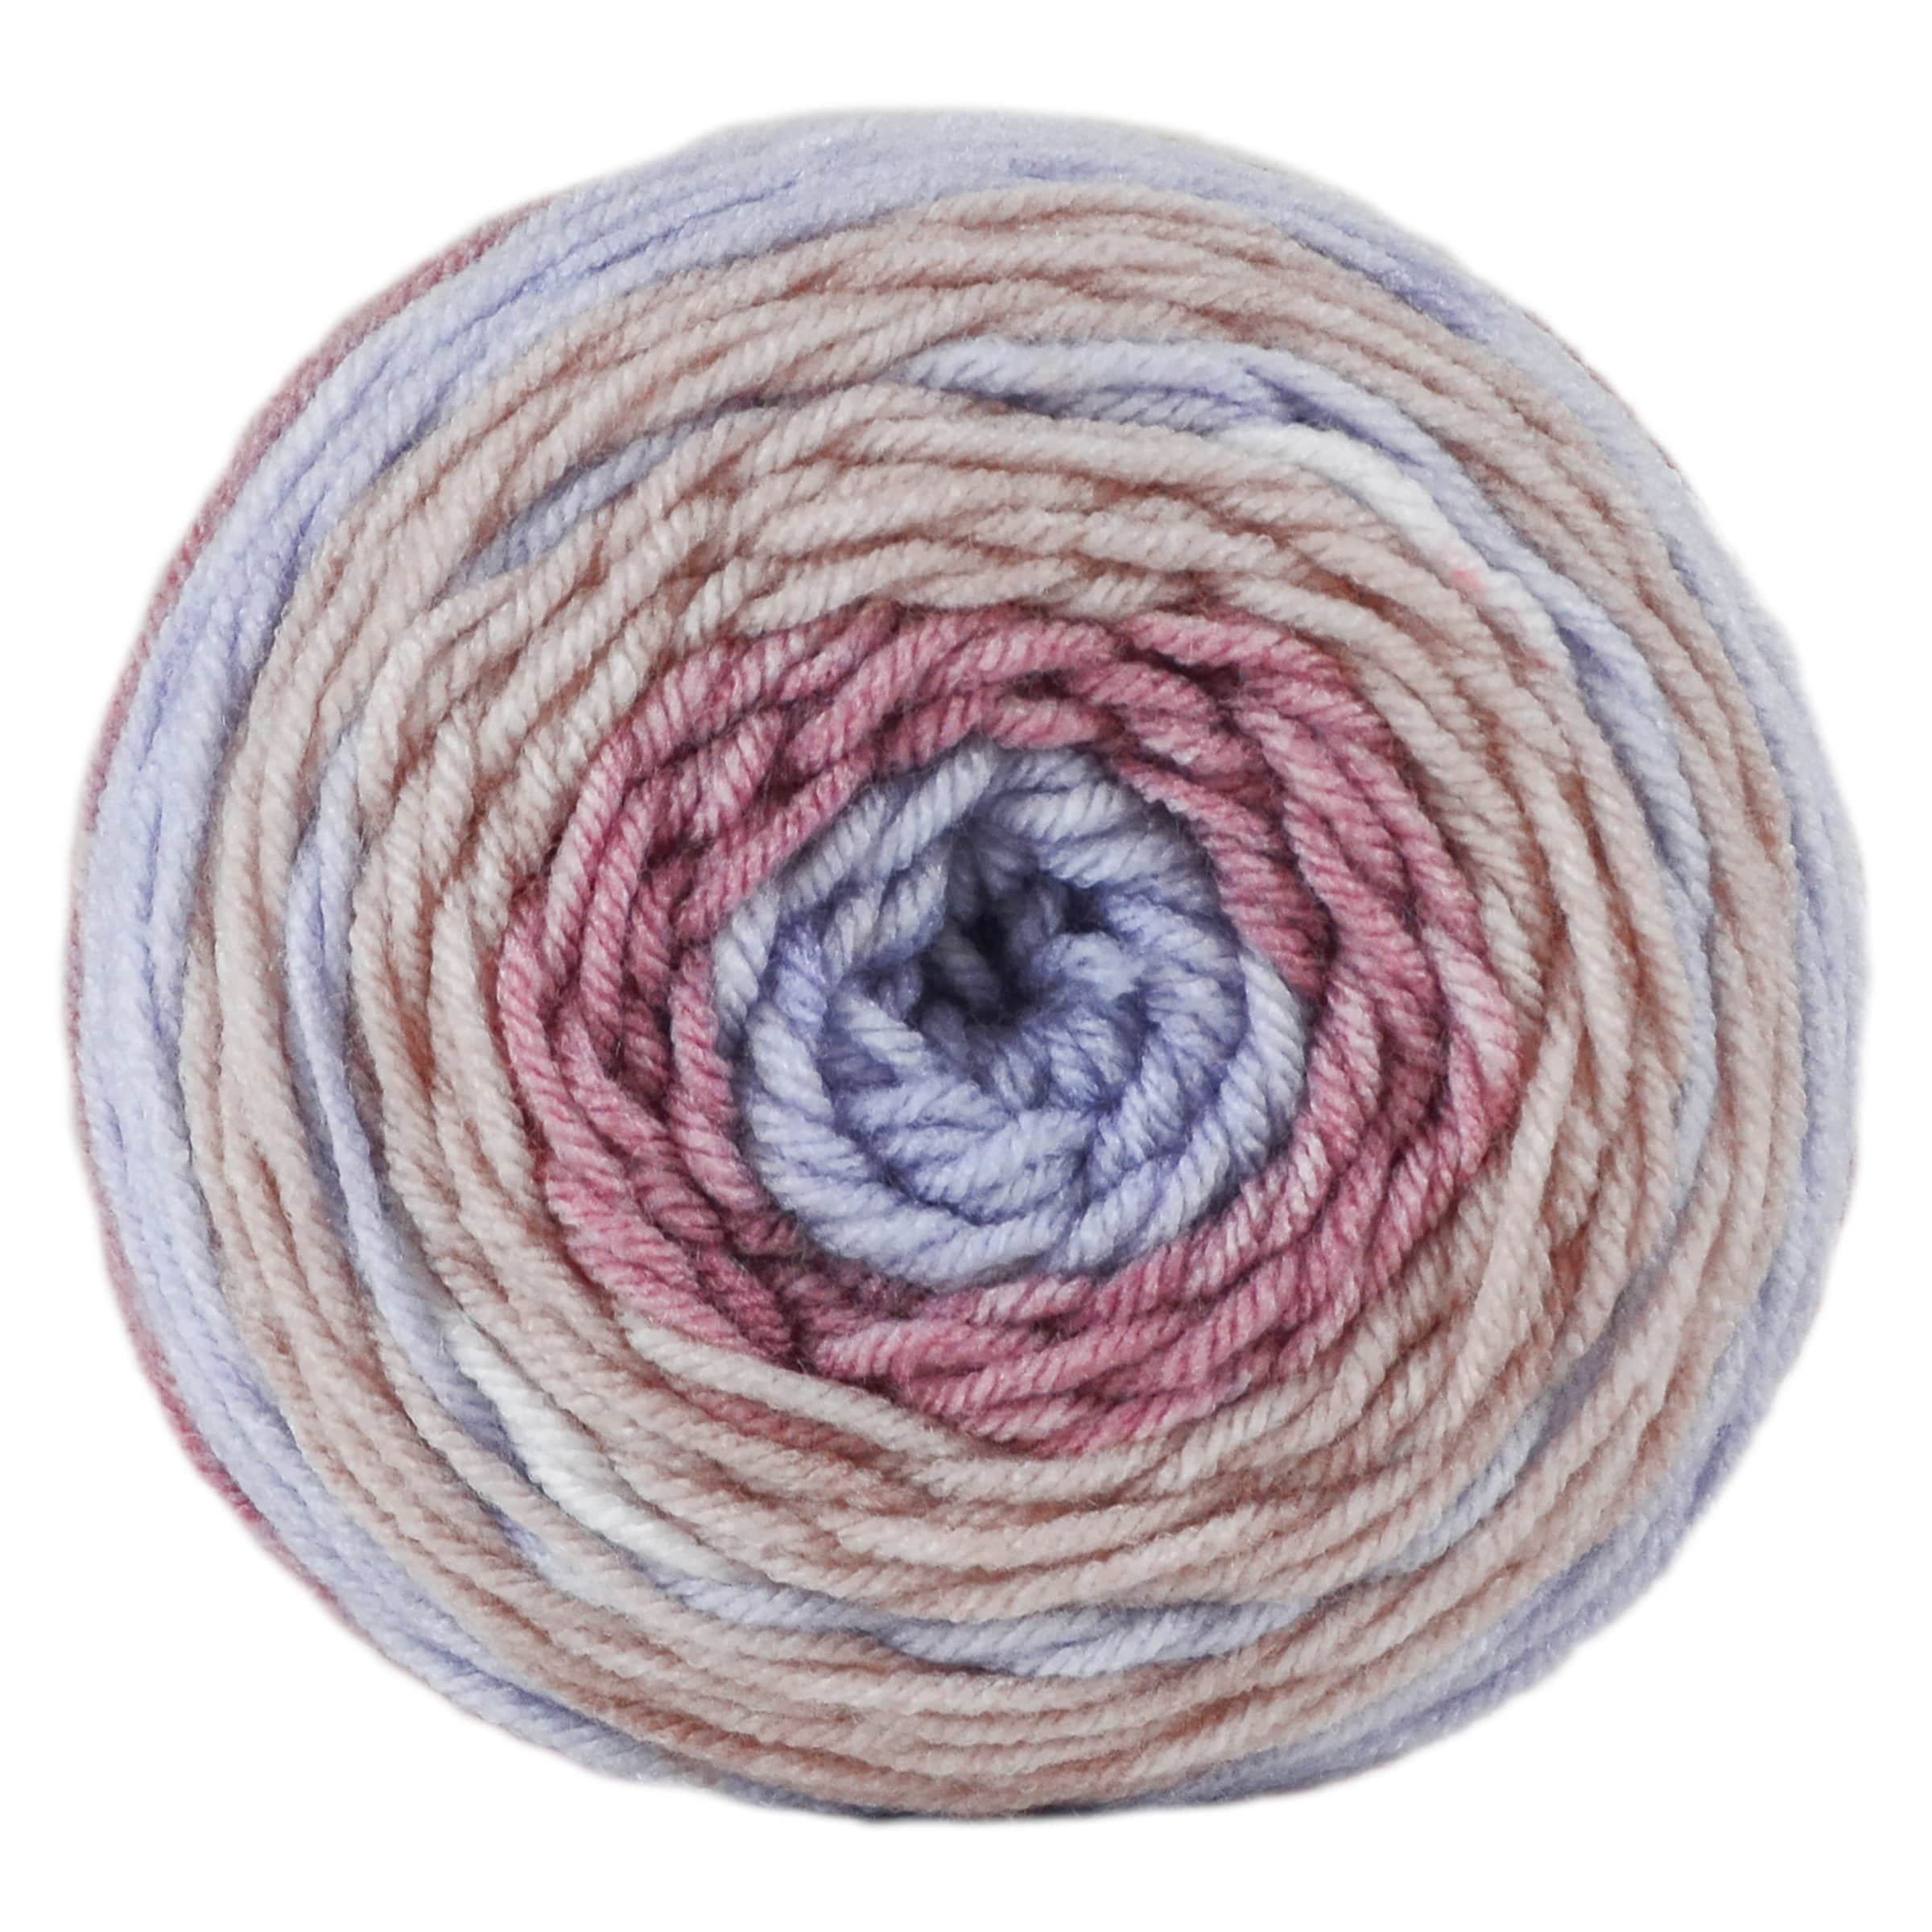 Premier Sweet Roll Yarn-Blue Willow, 1 count - Ralphs